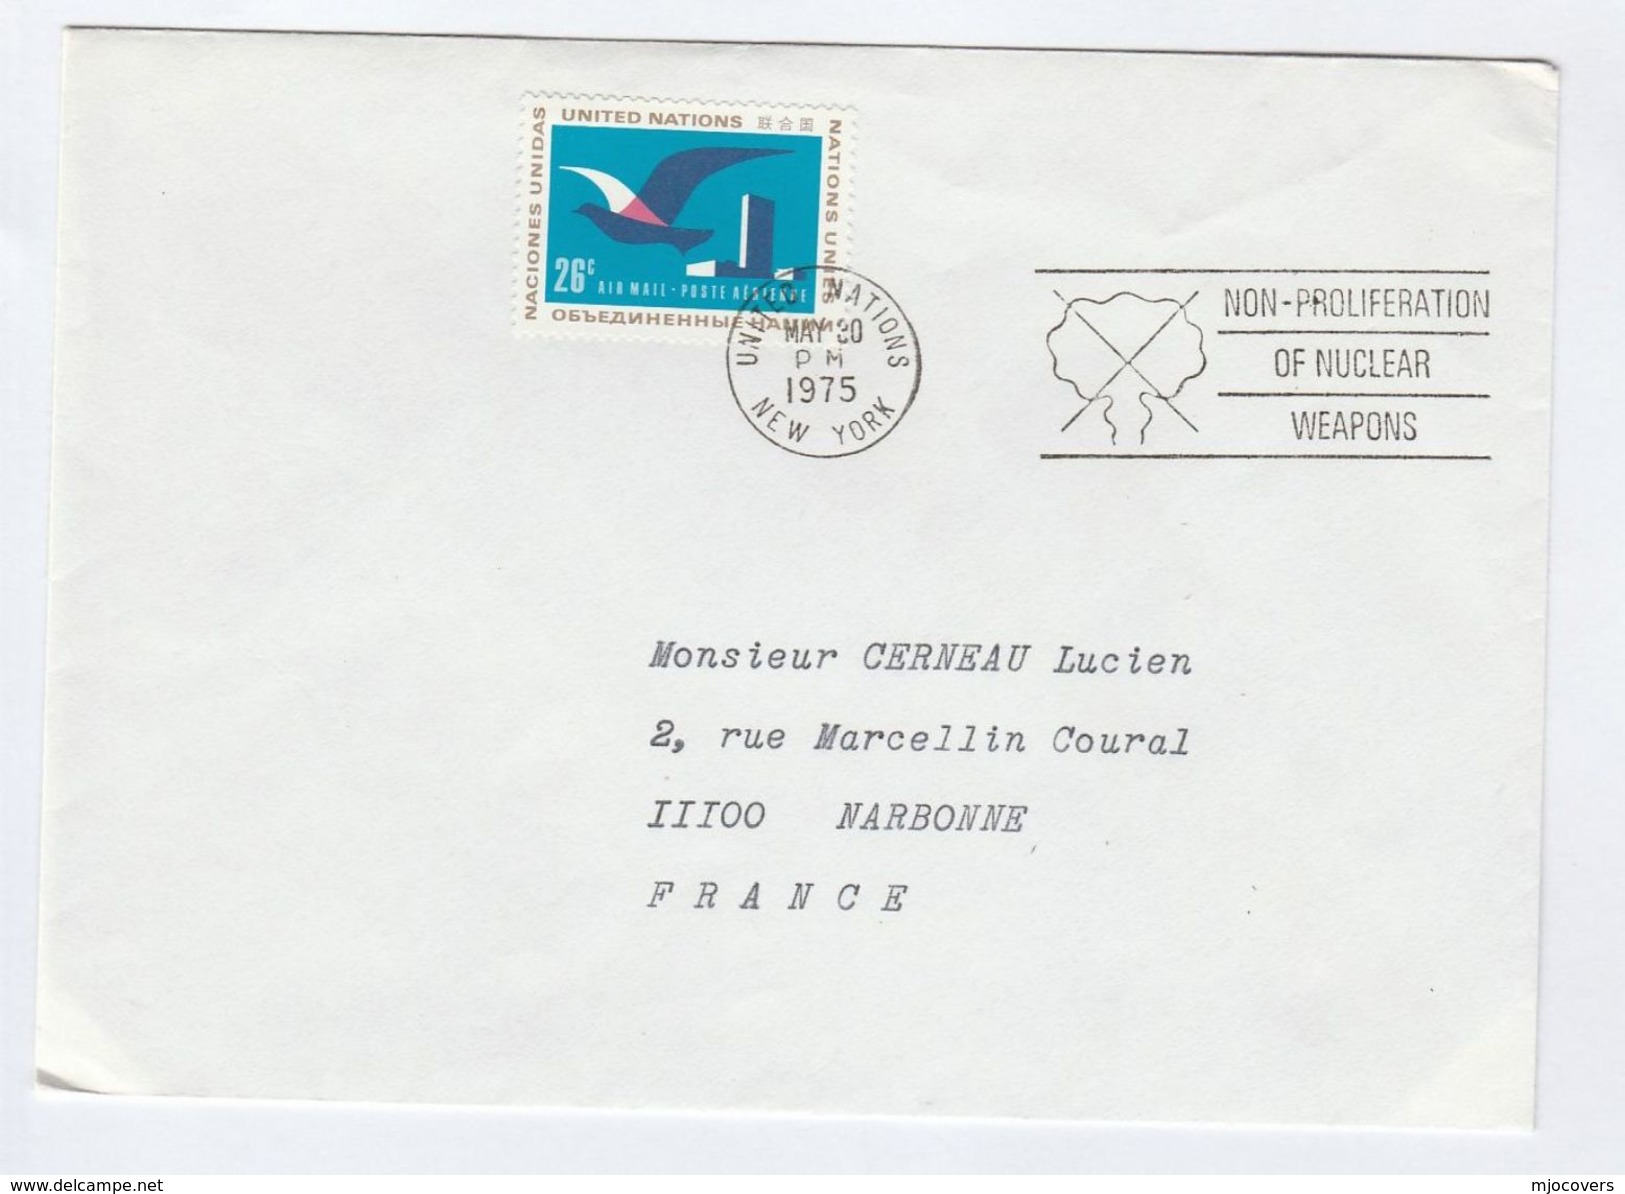 1975 UNITED NATIONS NY COVER SLOGAN Illus ATOMIC BOMB Non Proliferation Of NUCLEAR WEAPONS  Un Stamps  To France Energy - Atom